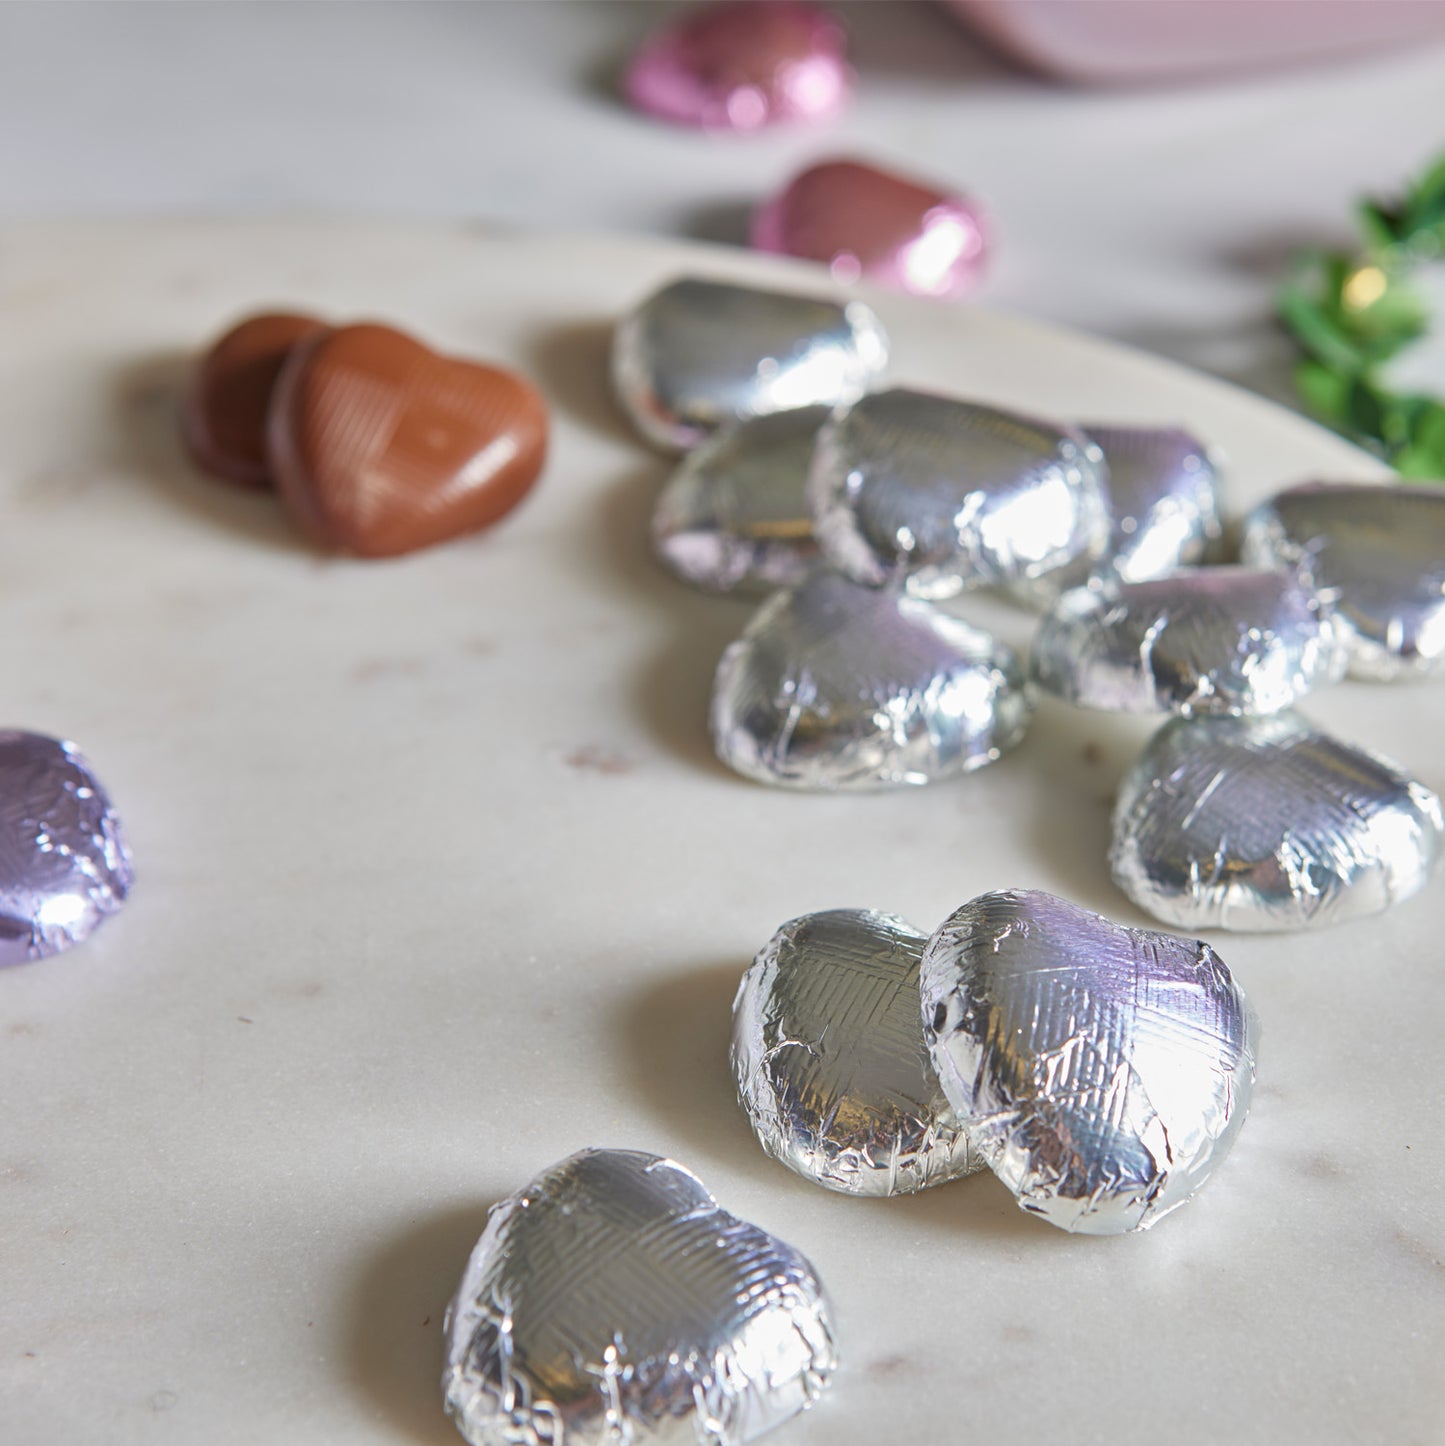 milk chocolate hearts individually wrapped in silver foil packed in 1kg boxes